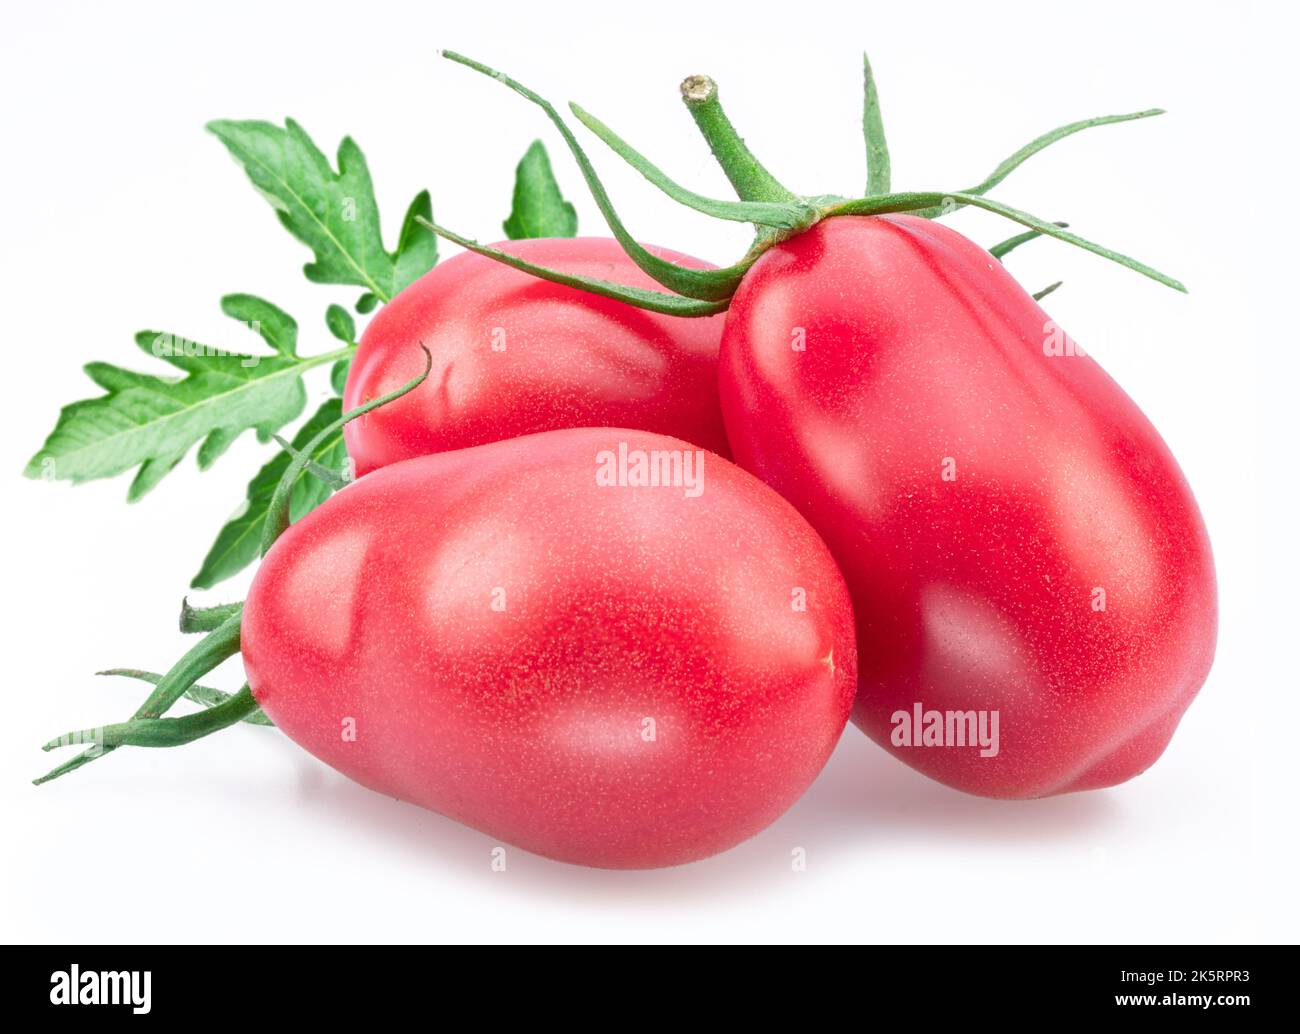 Three pink tomatoes (plums) with tomato leaves isolated on white background. Stock Photo